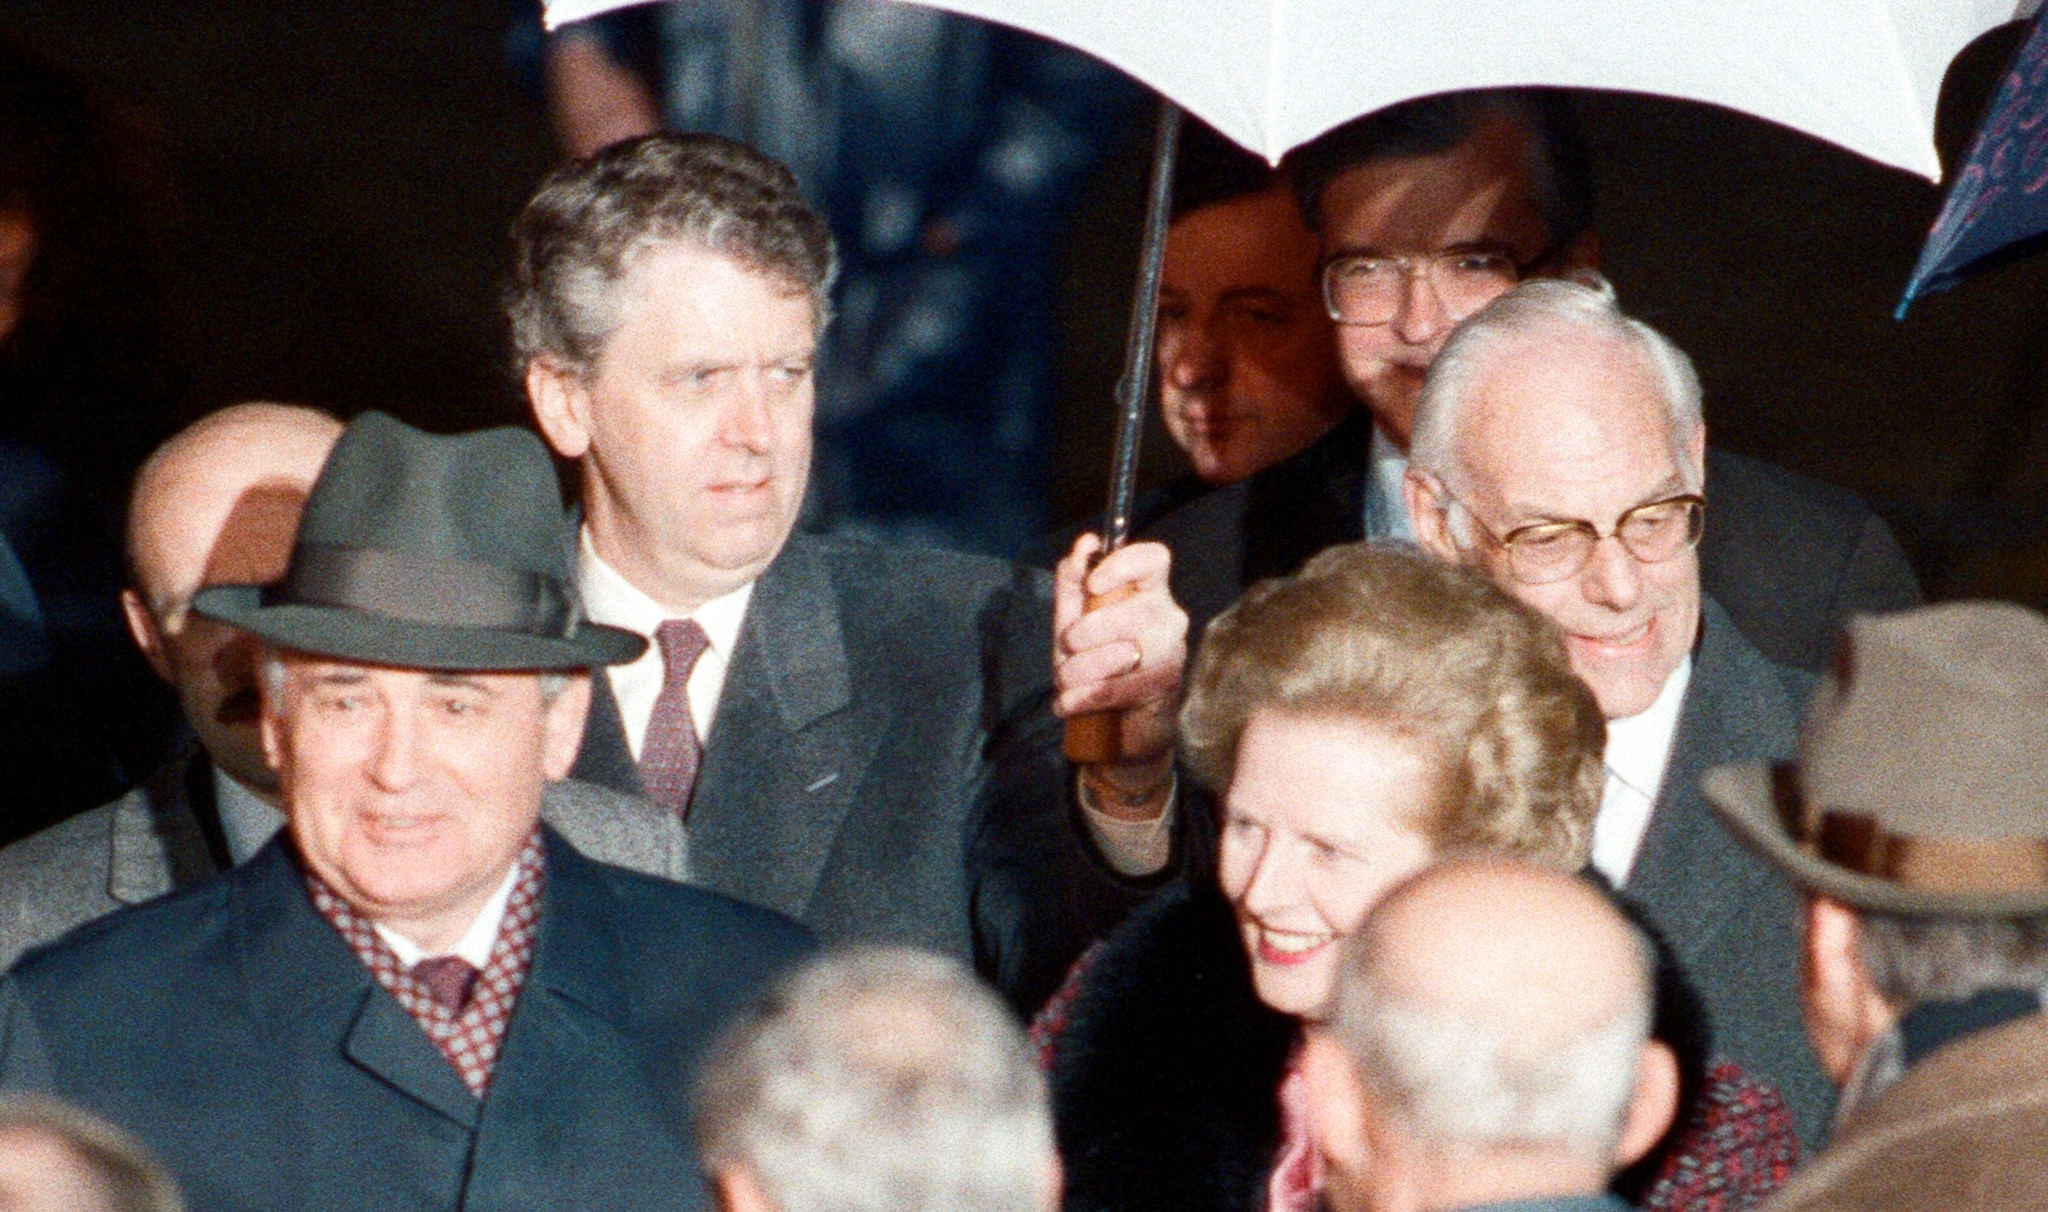 Charles Powell holds an umbrella for Margaret Thatcher on a foreign engagement. (Photo: Bill Rowntree / Mirrorpix / Getty)